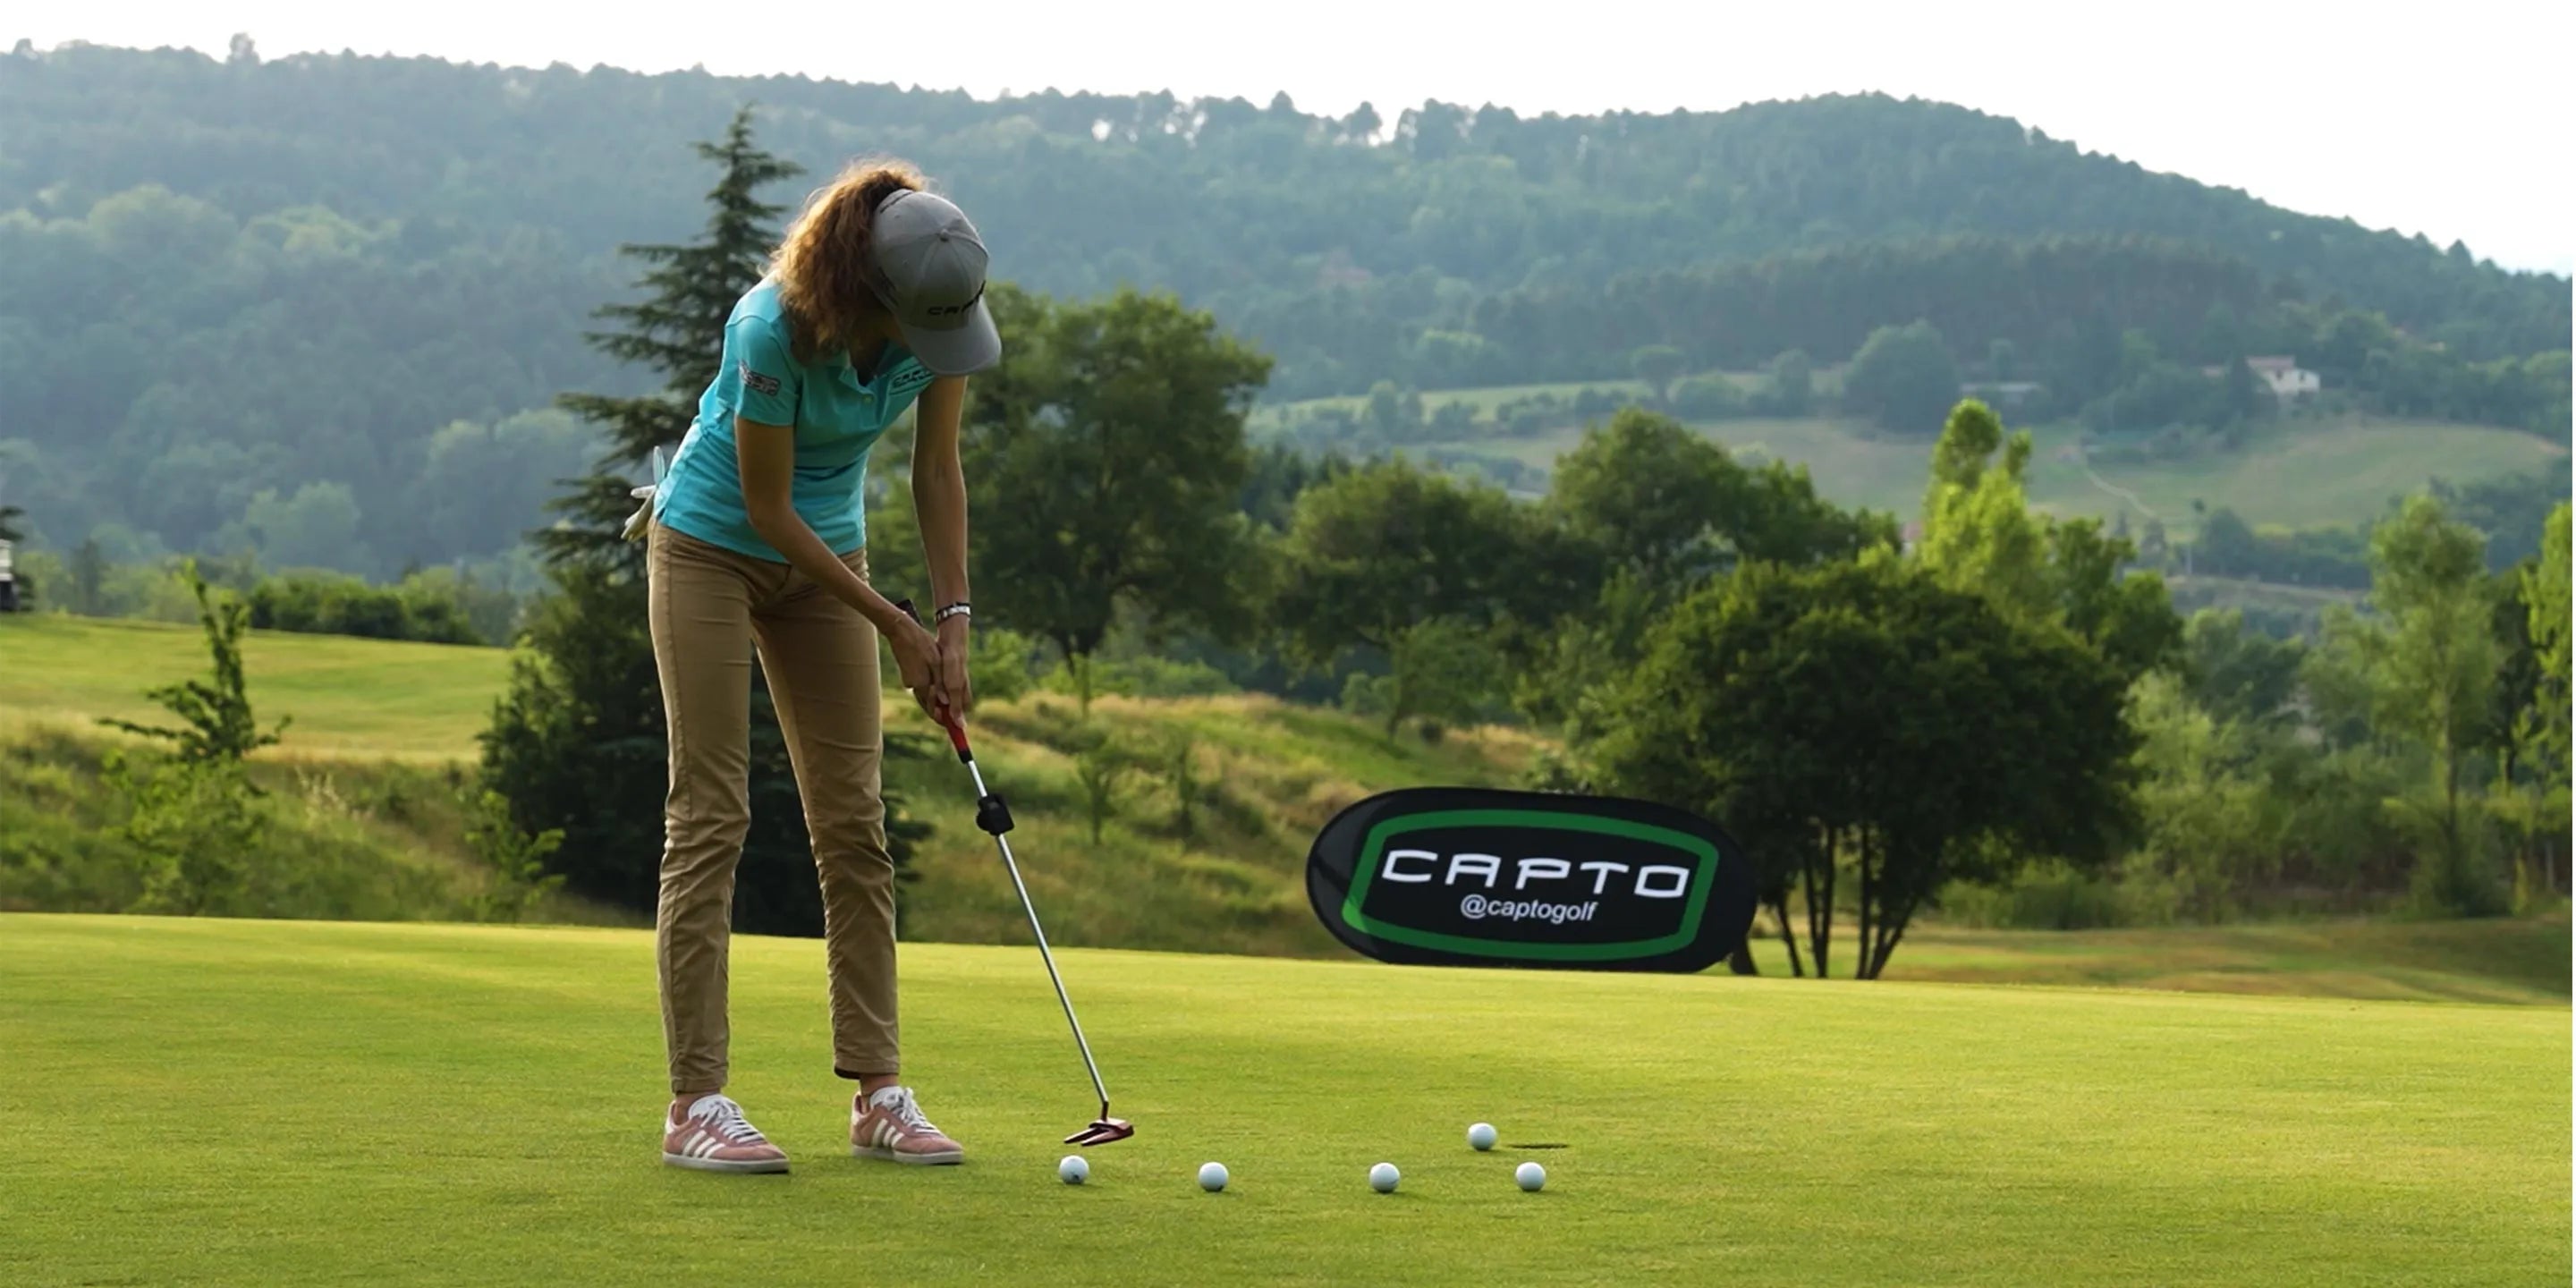 A golfer putting out on a green using the Capto device